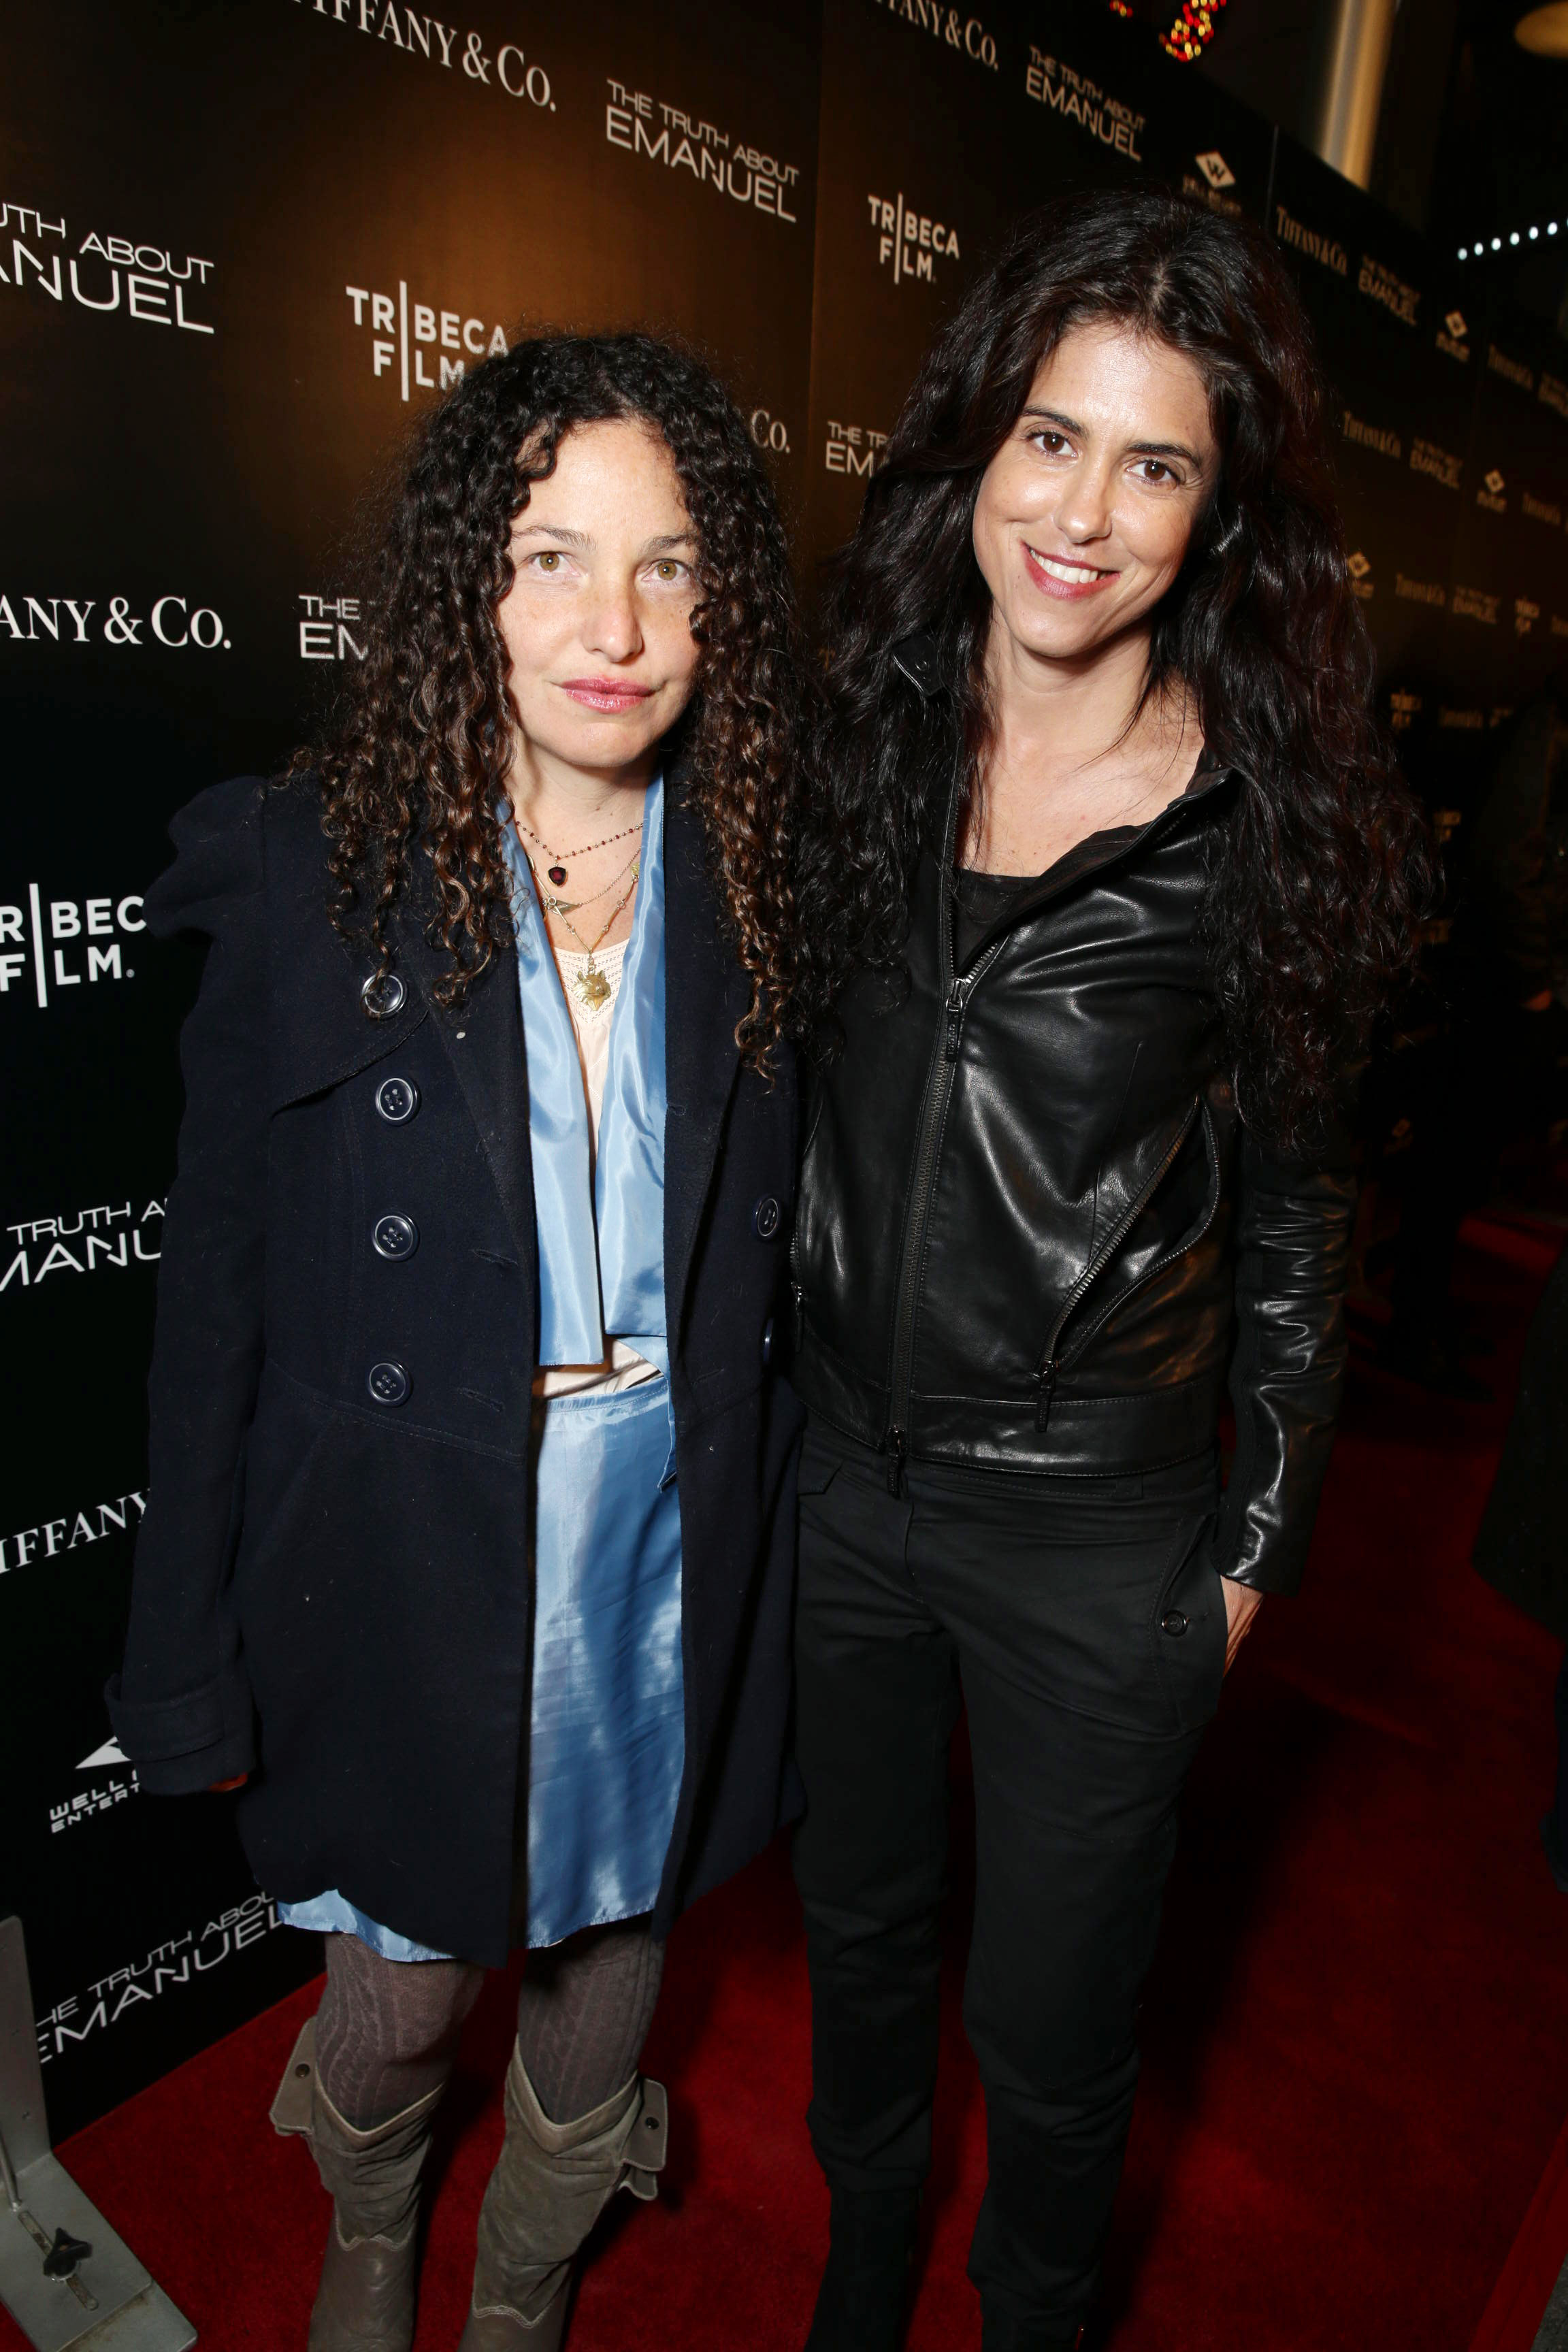 Francesca Gregorini and Tatiana von Furstenberg on the red carpet at The Truth About Emanuel